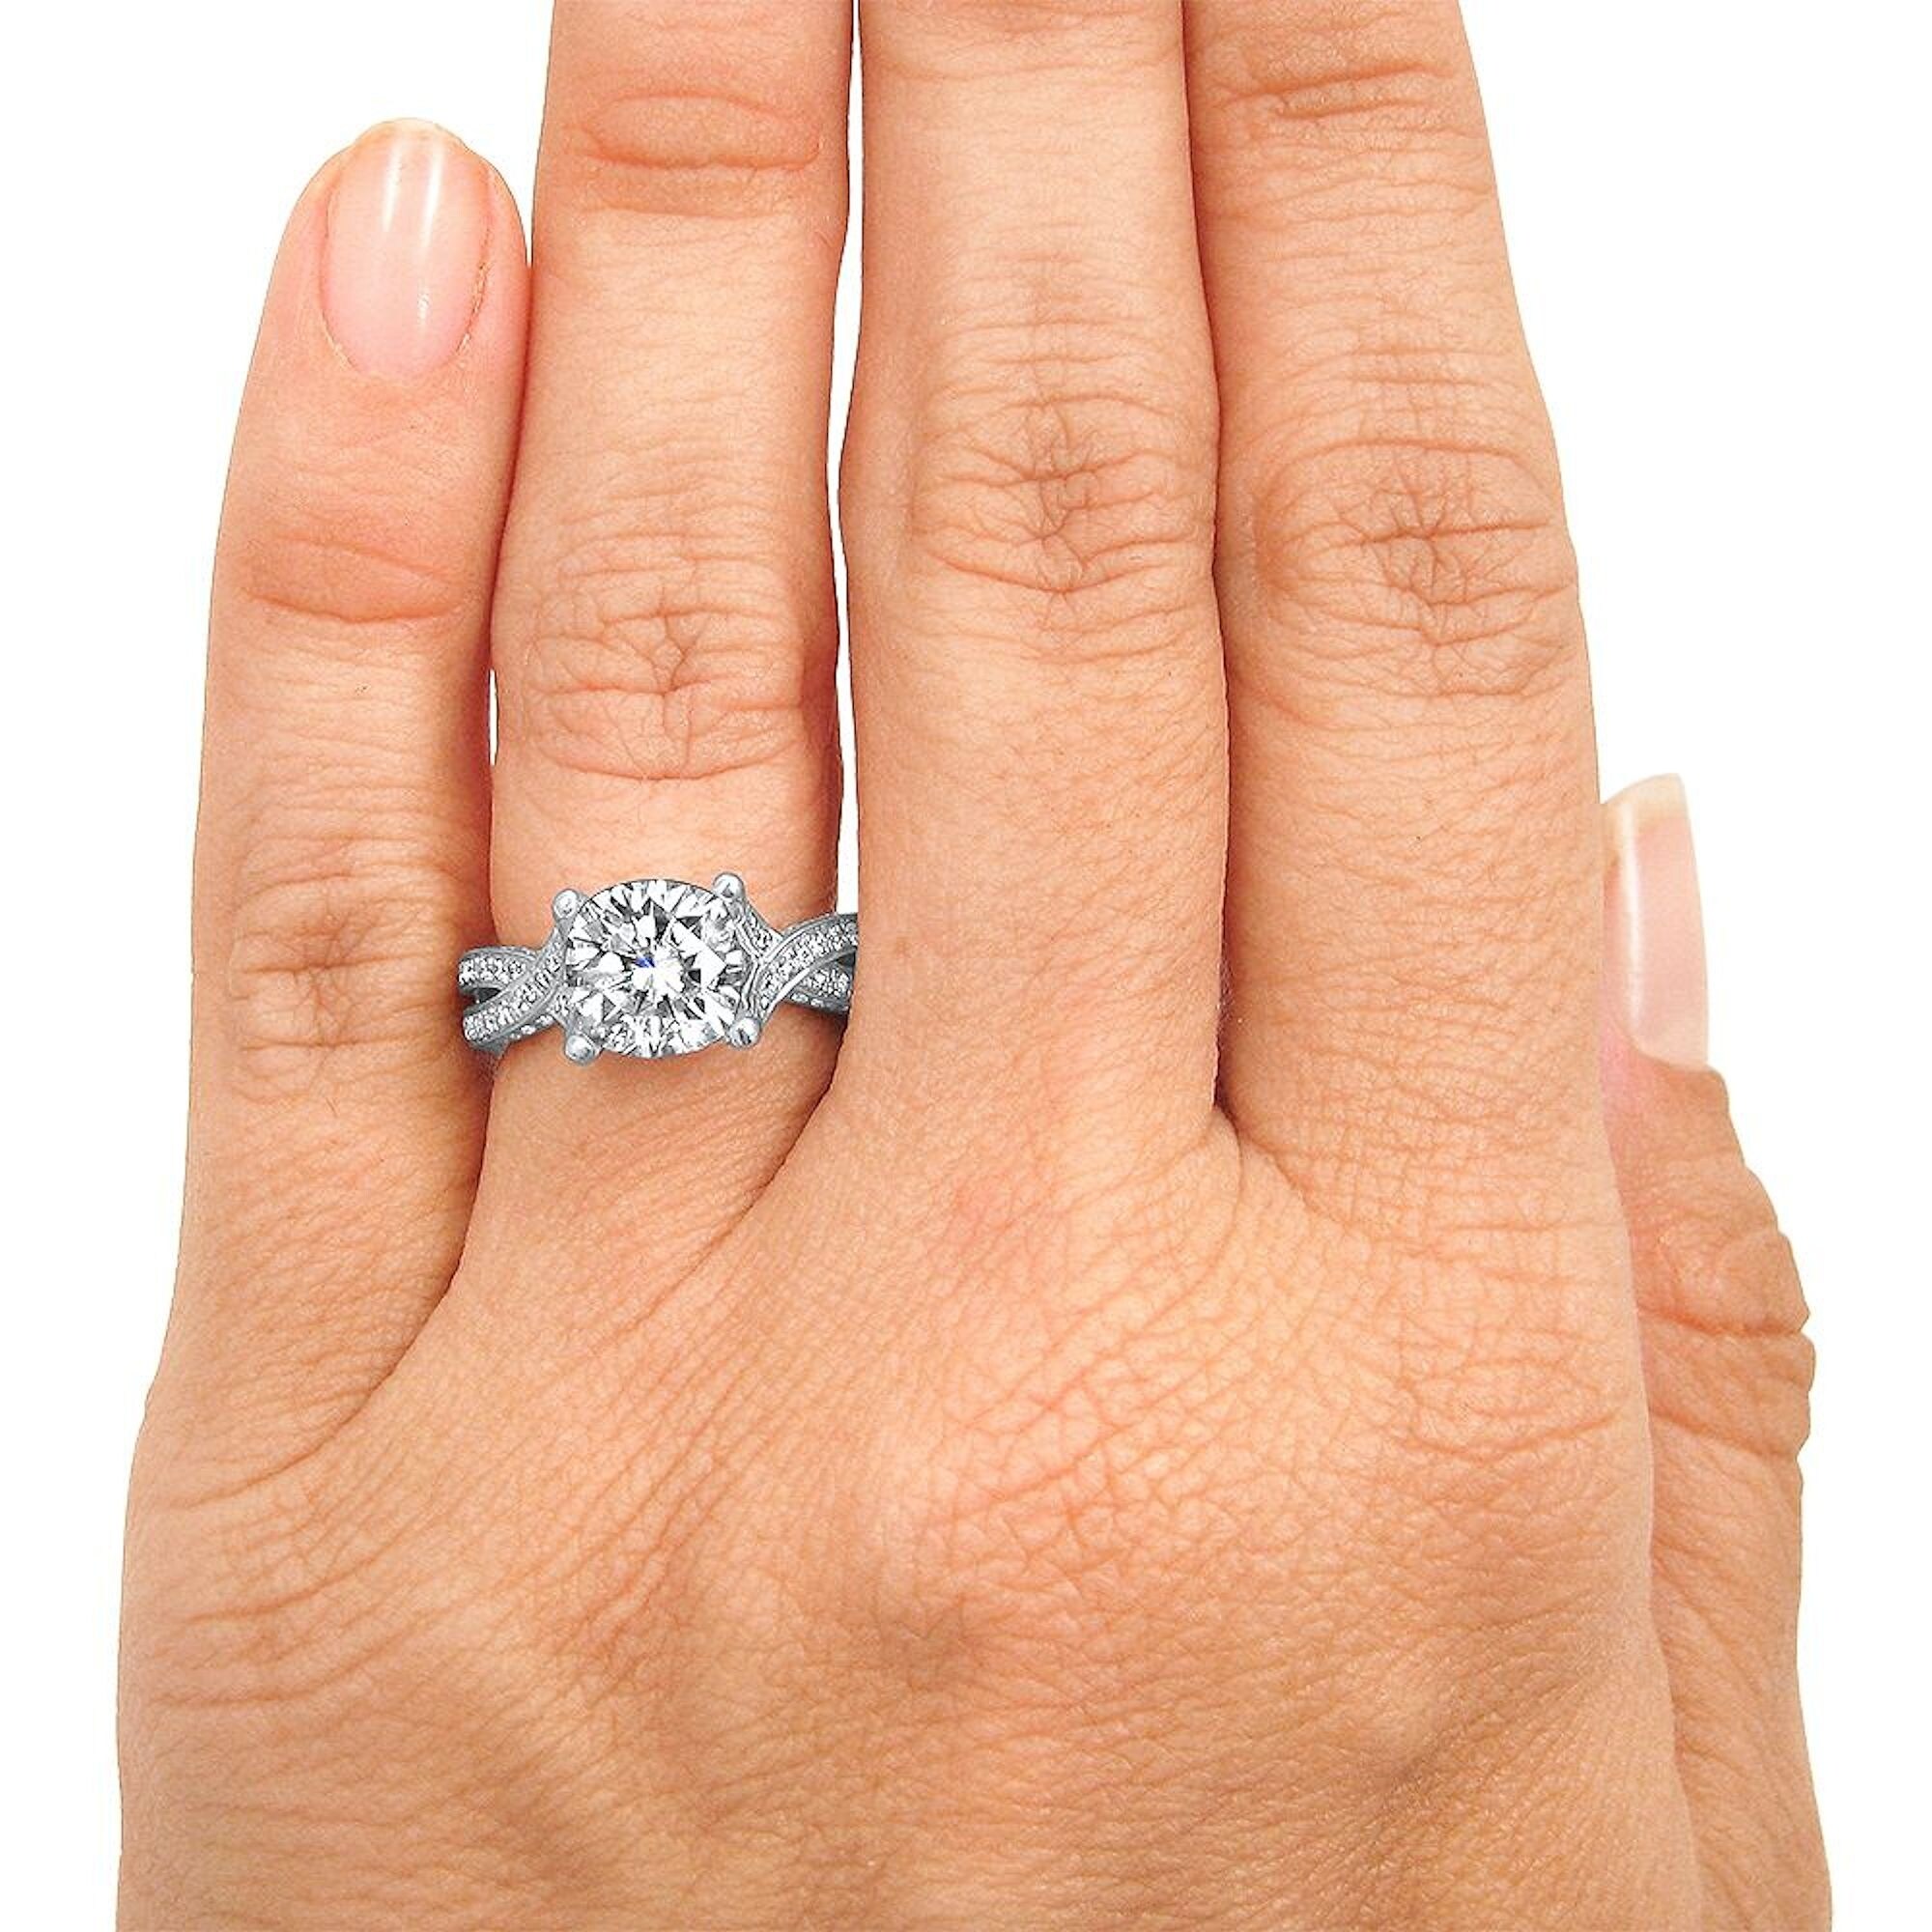 Details about   3Ct Round Cut Moissanite Diamond Solitaire Engagement Ring 14K White Gold Finish